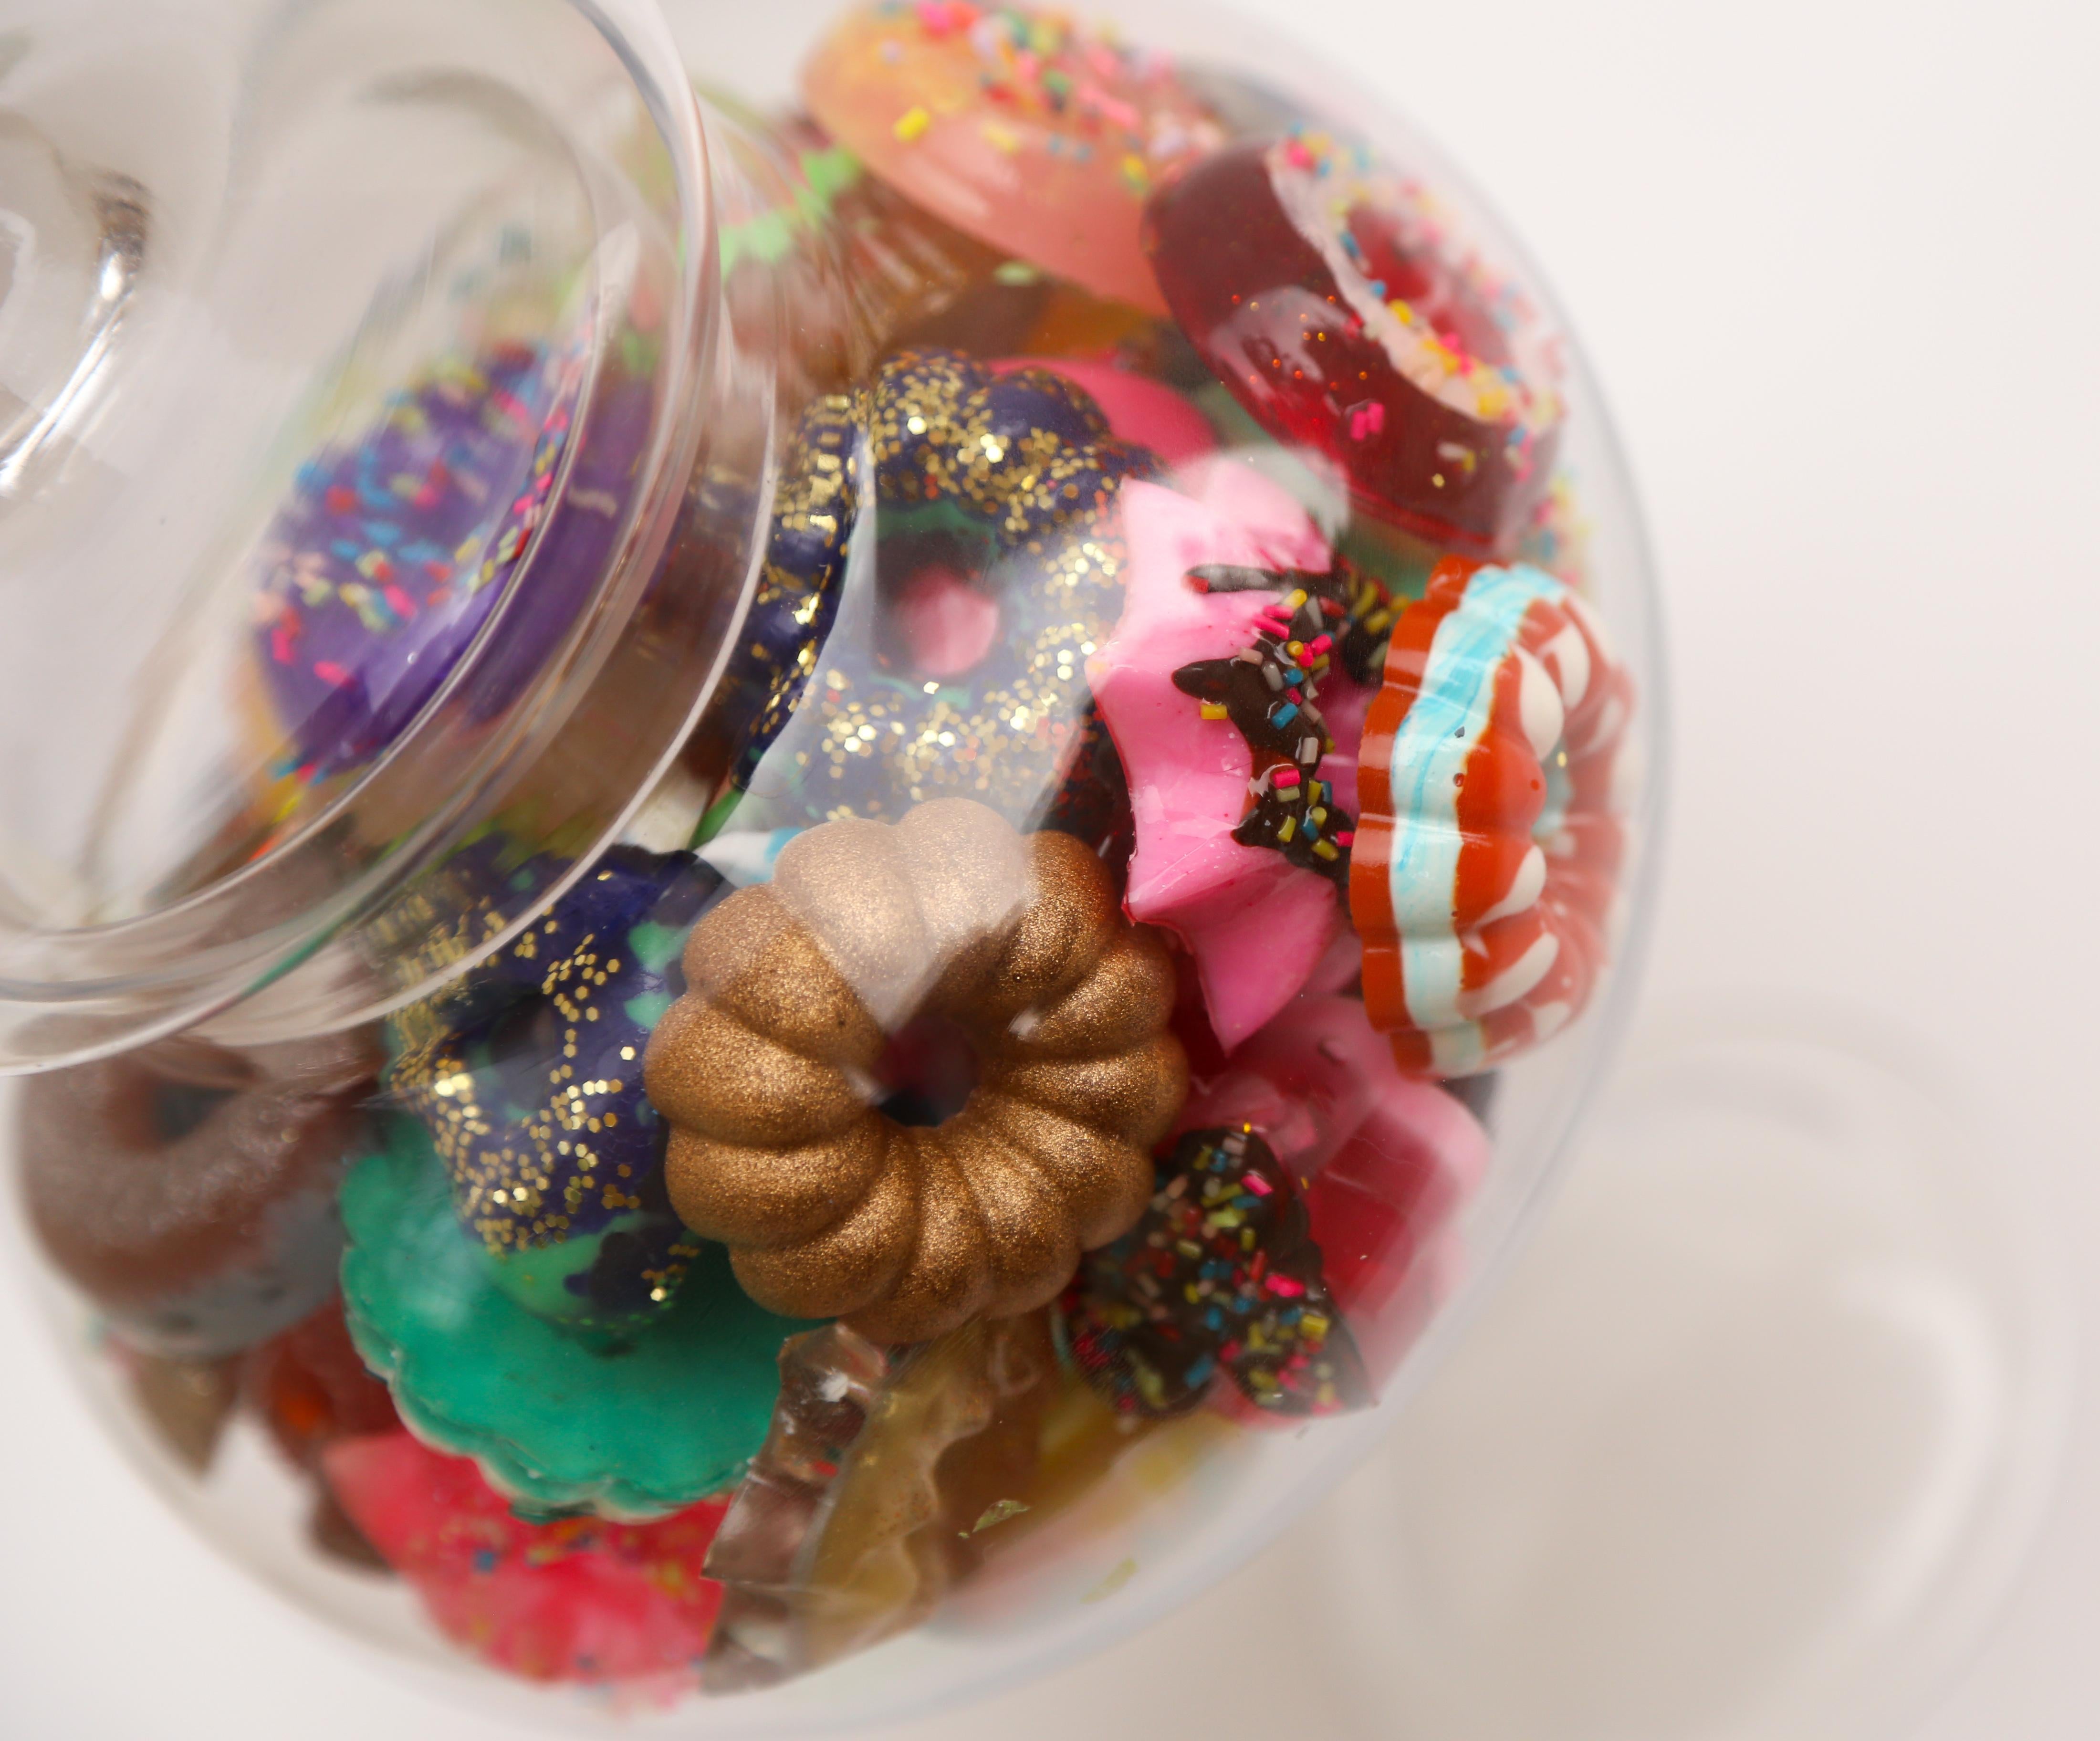 Donut Jar - Handmade Mini Resin Donuts in Glass Candy Jar / colorful  - Pop Art Sculpture by Betsy Enzensberger